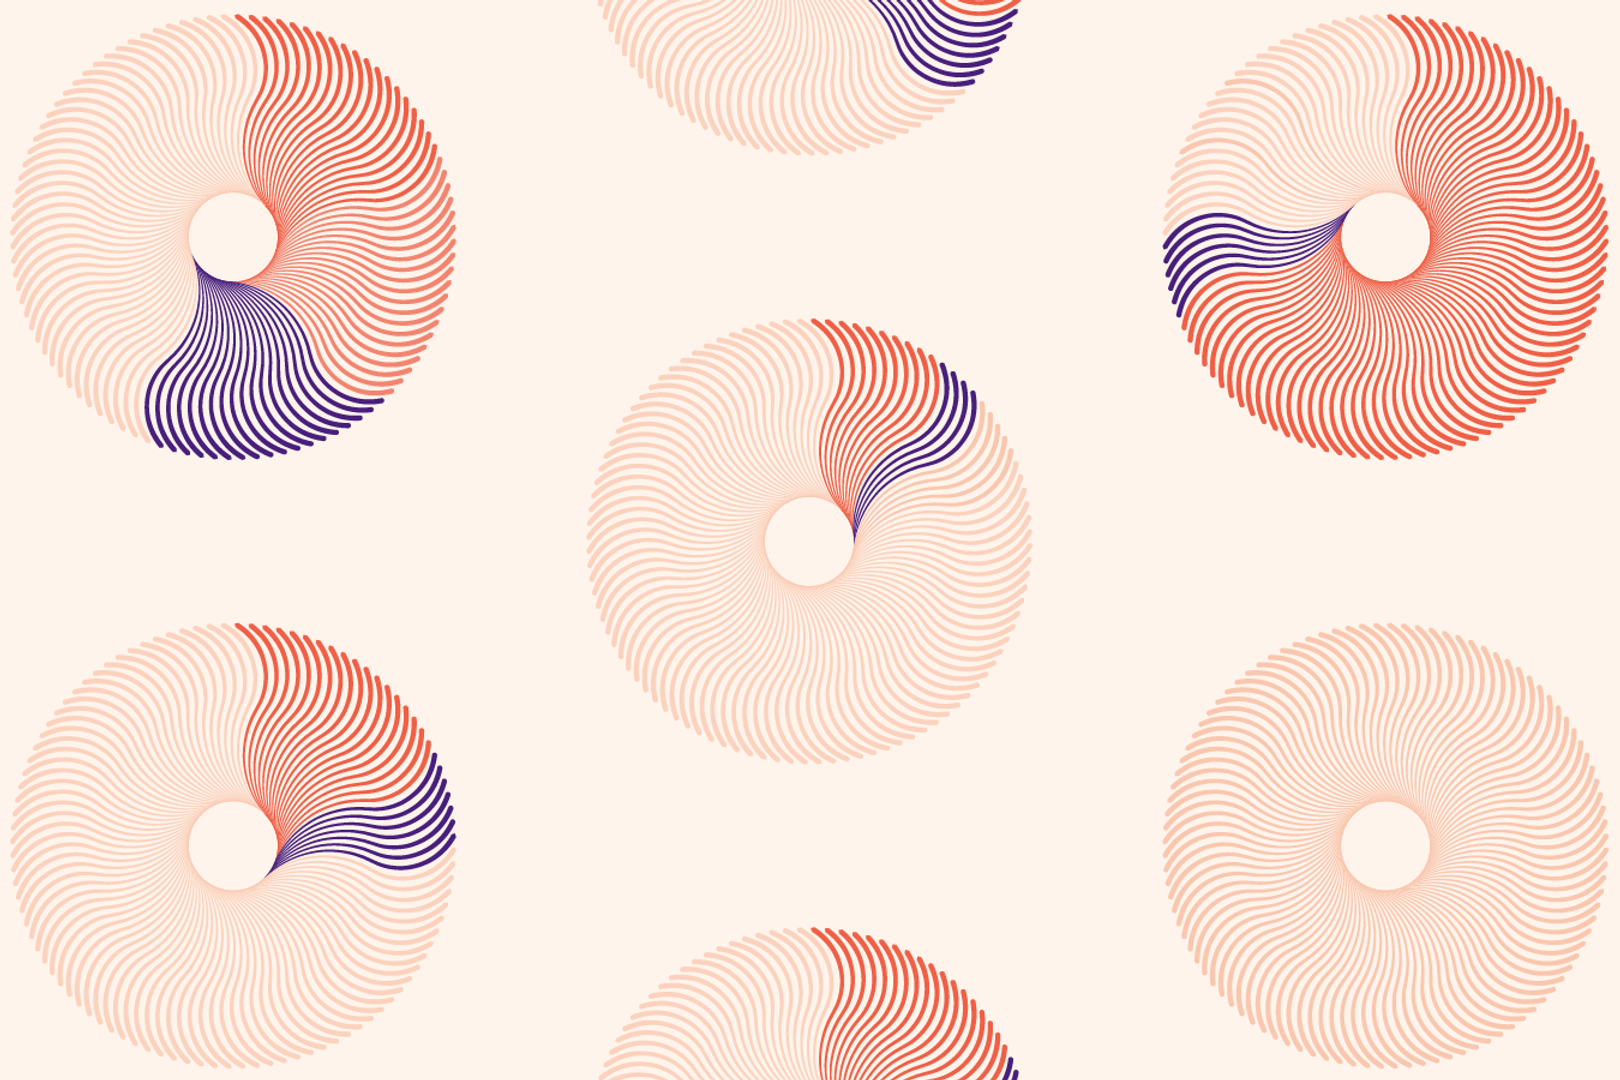 Several abstract circles, each made of several small curved lines. The circles have smaller circular holes cut out in the middle.